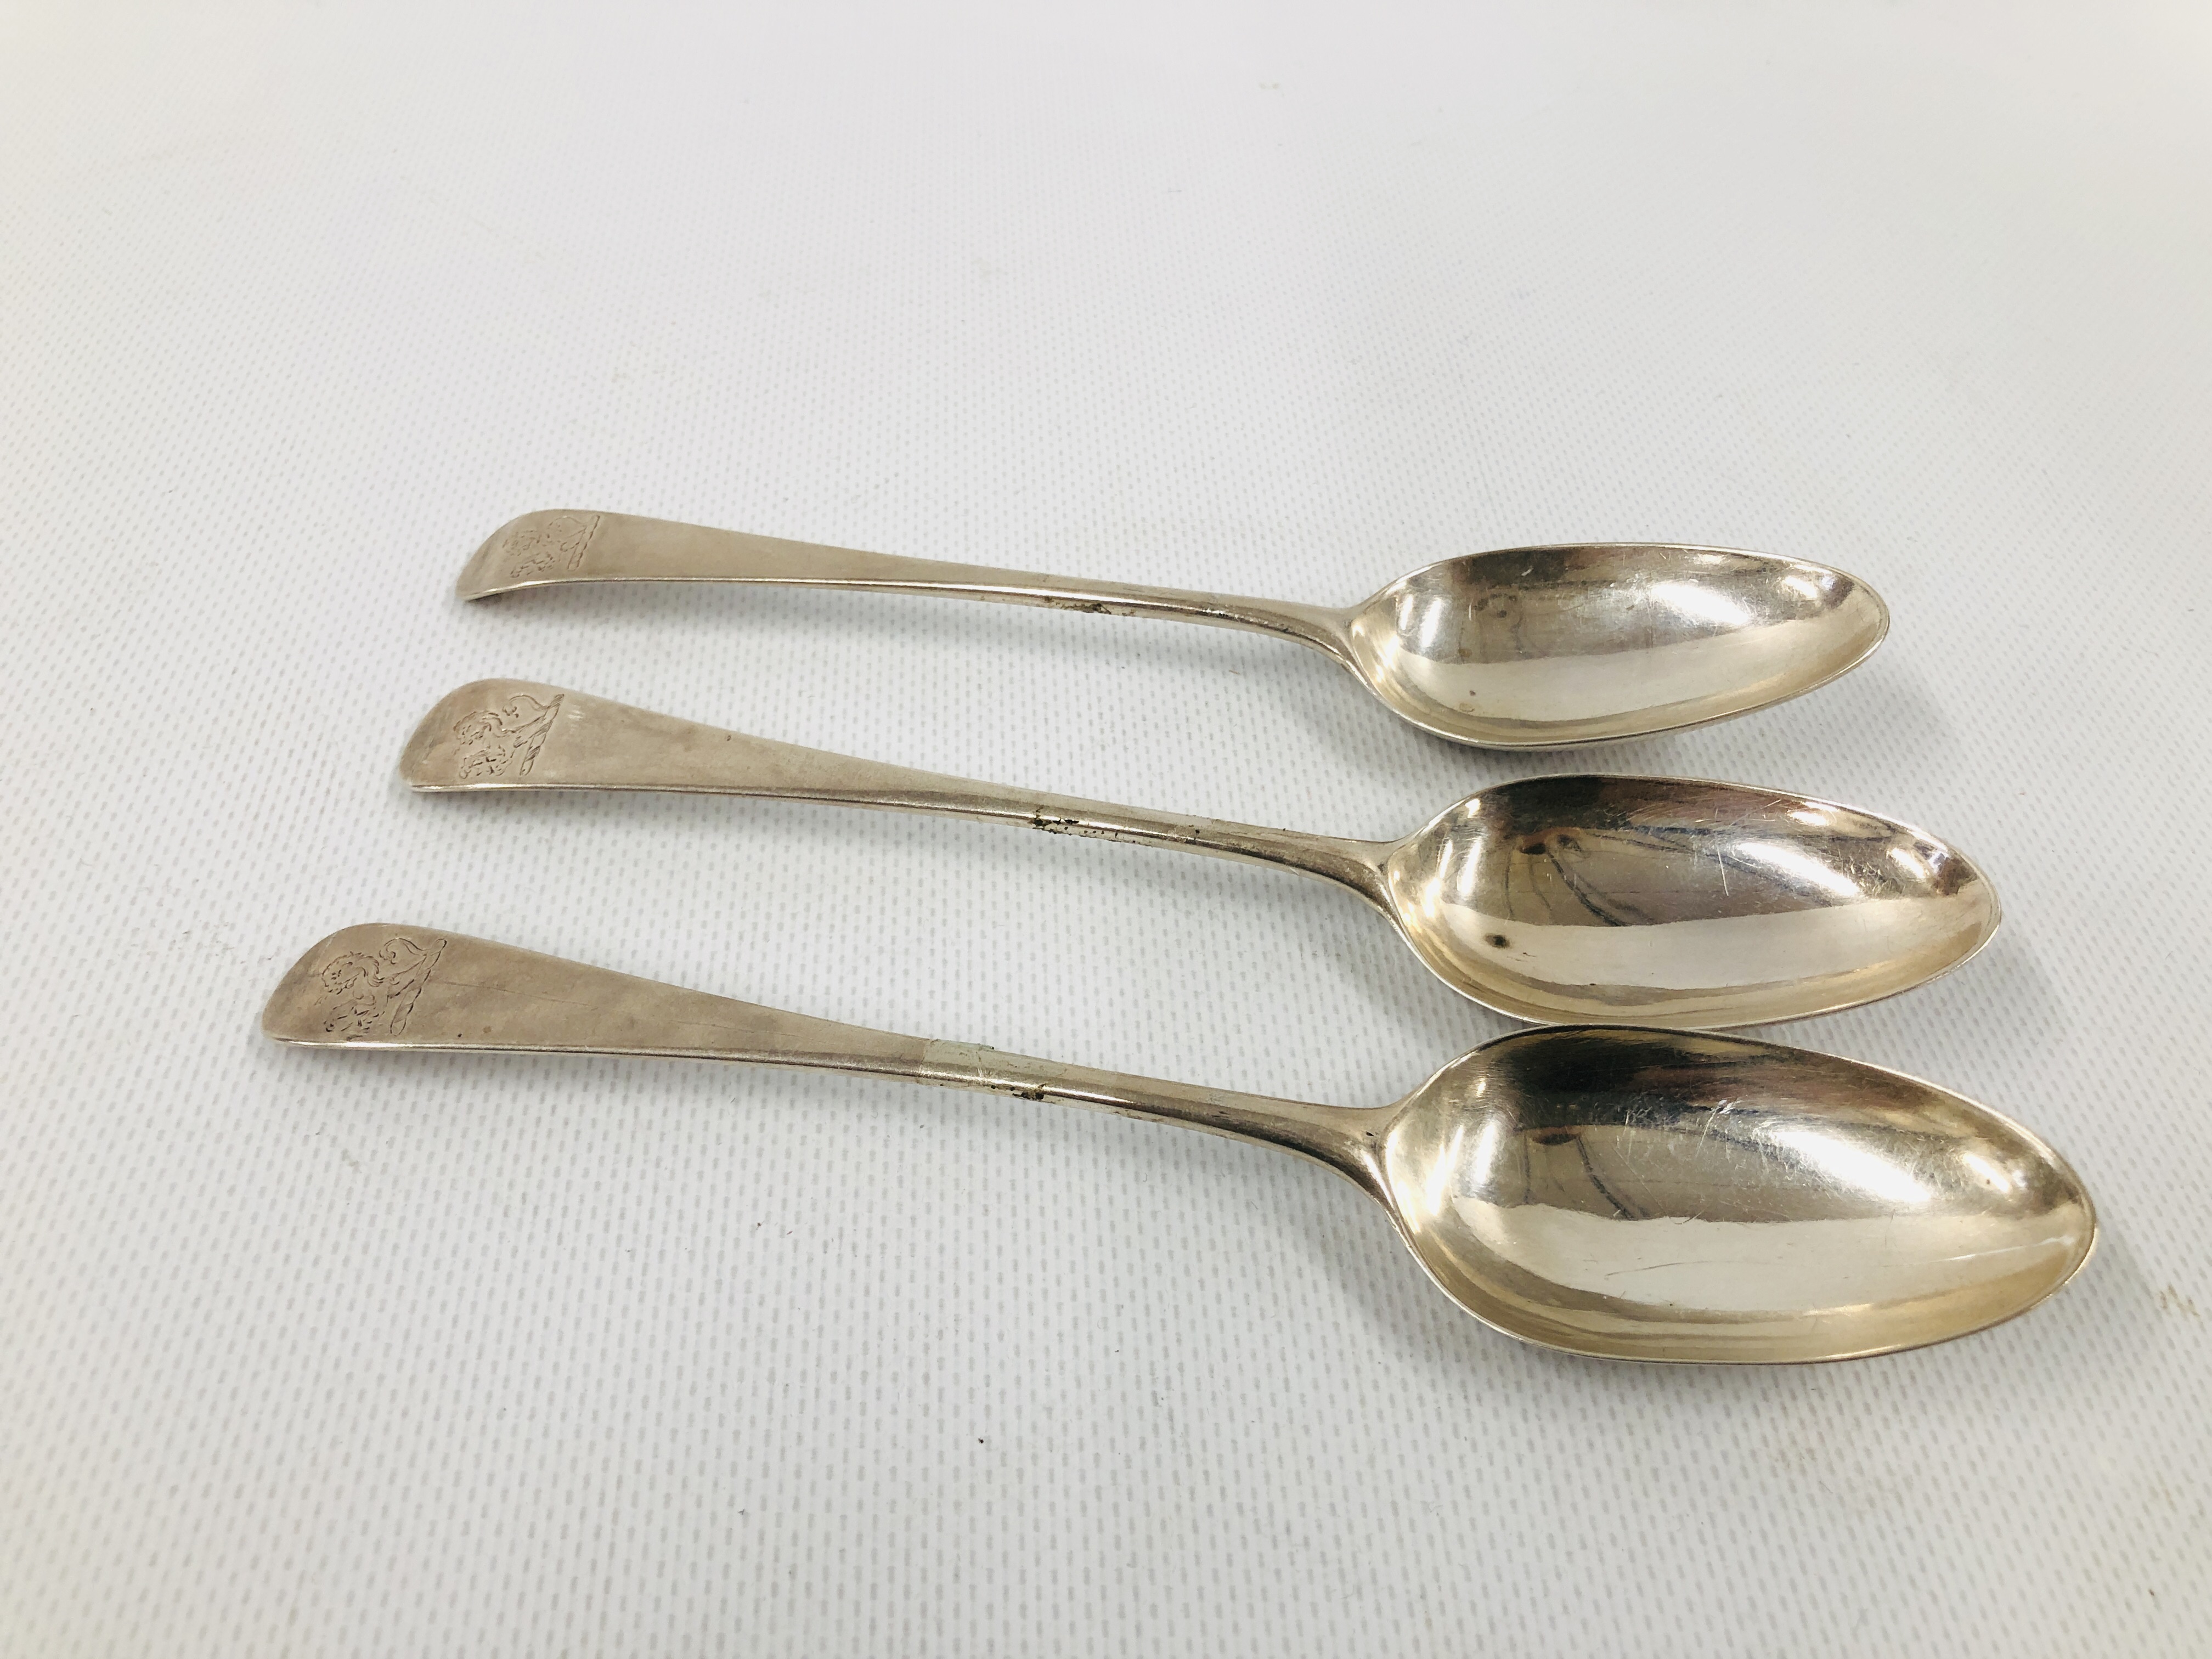 THREE GEORGE II SILVER OLD ENGLISH PATTERN DESSERT SPOONS, PROBABLY LONDON 1759.